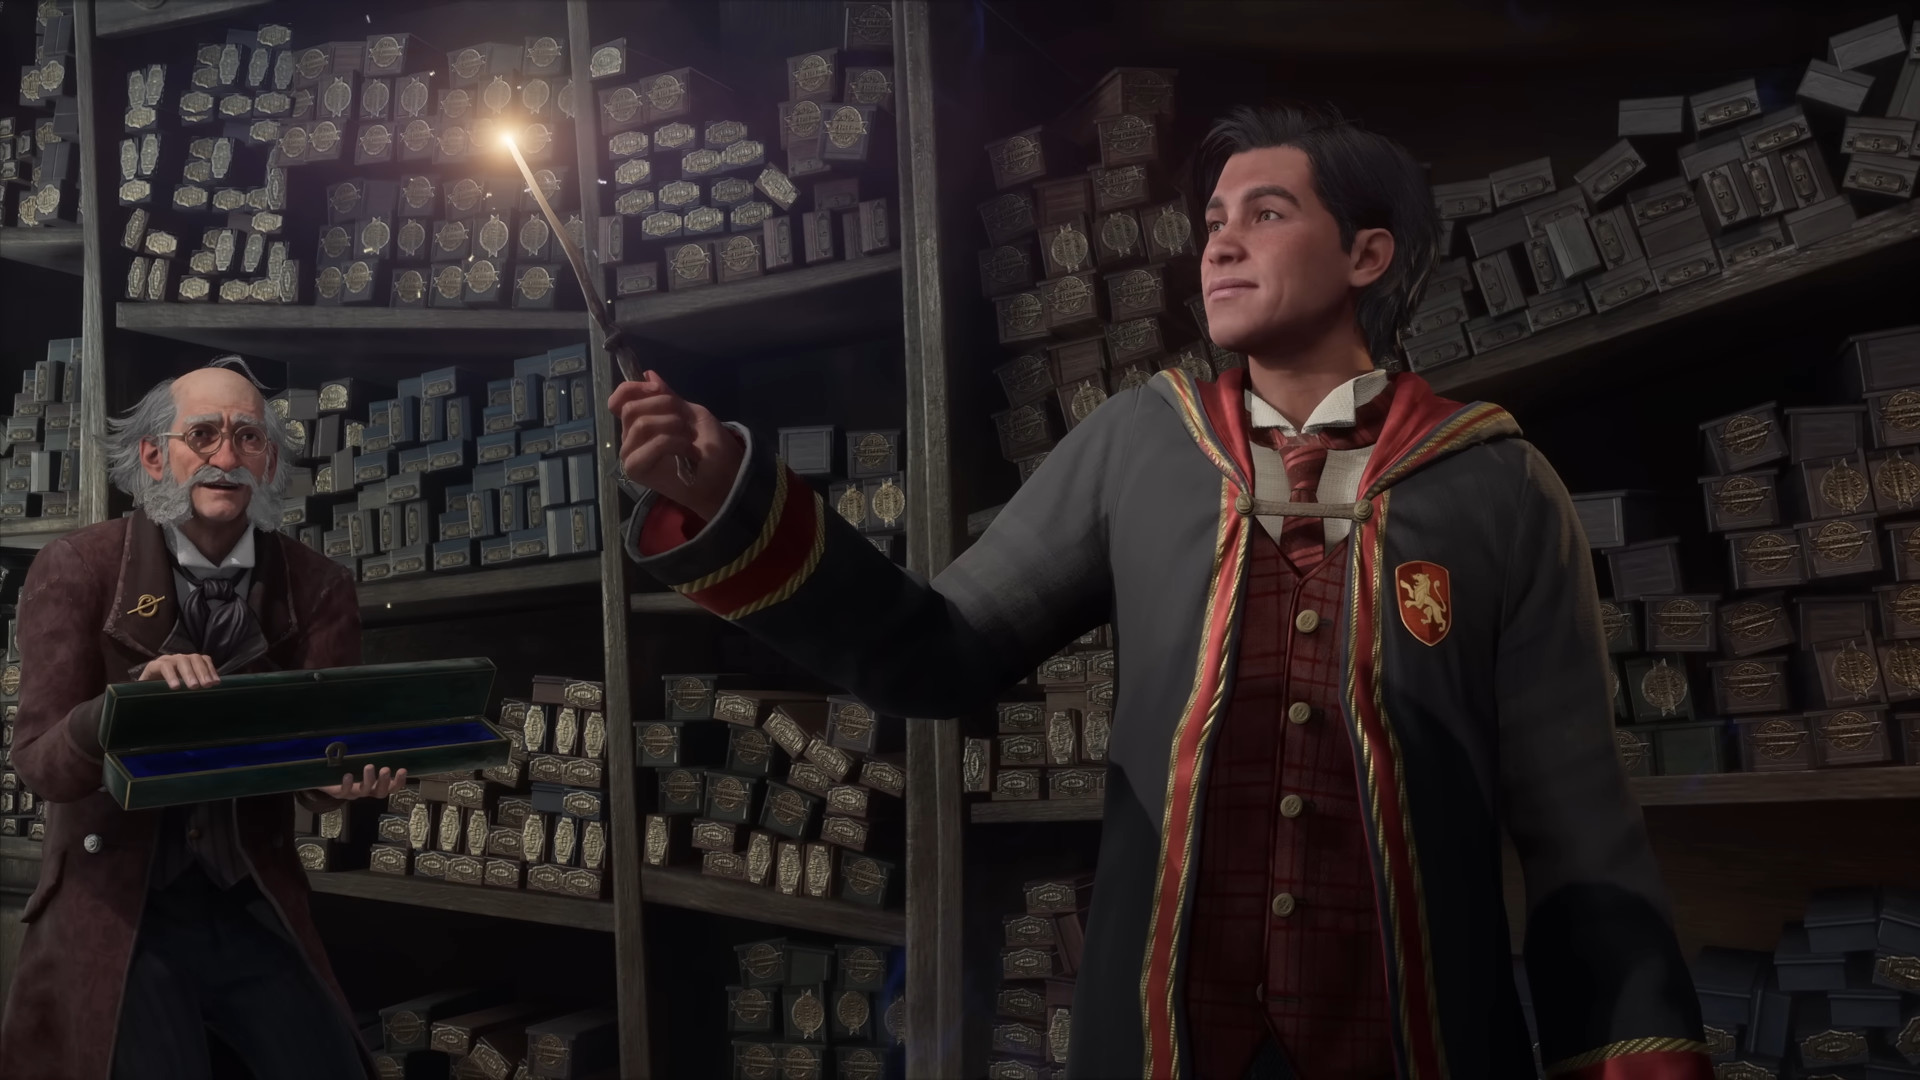 Best Hogwarts Legcacy settings: A student holds their wand, arm outstretched, and gazes in admiration at the warm glow eminating from its tip